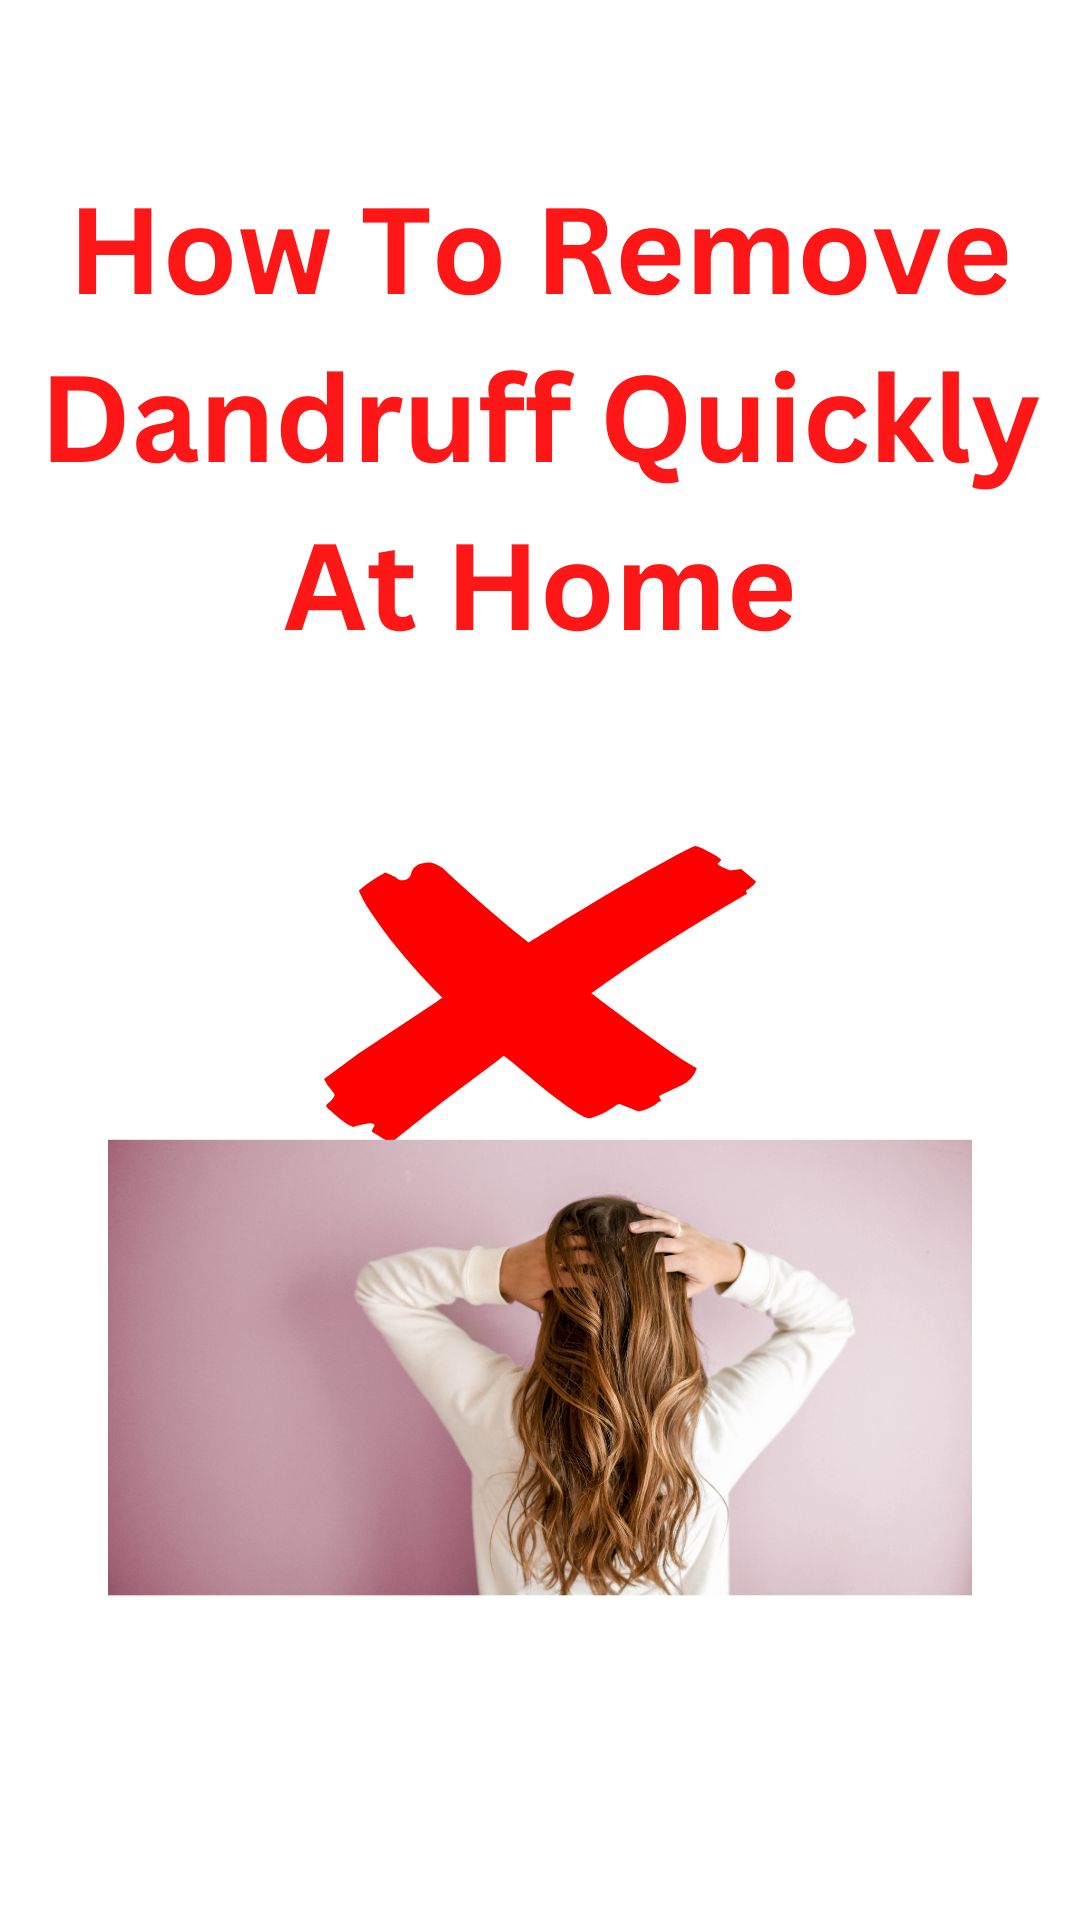 How To Remove Dandruff Quickly At Home